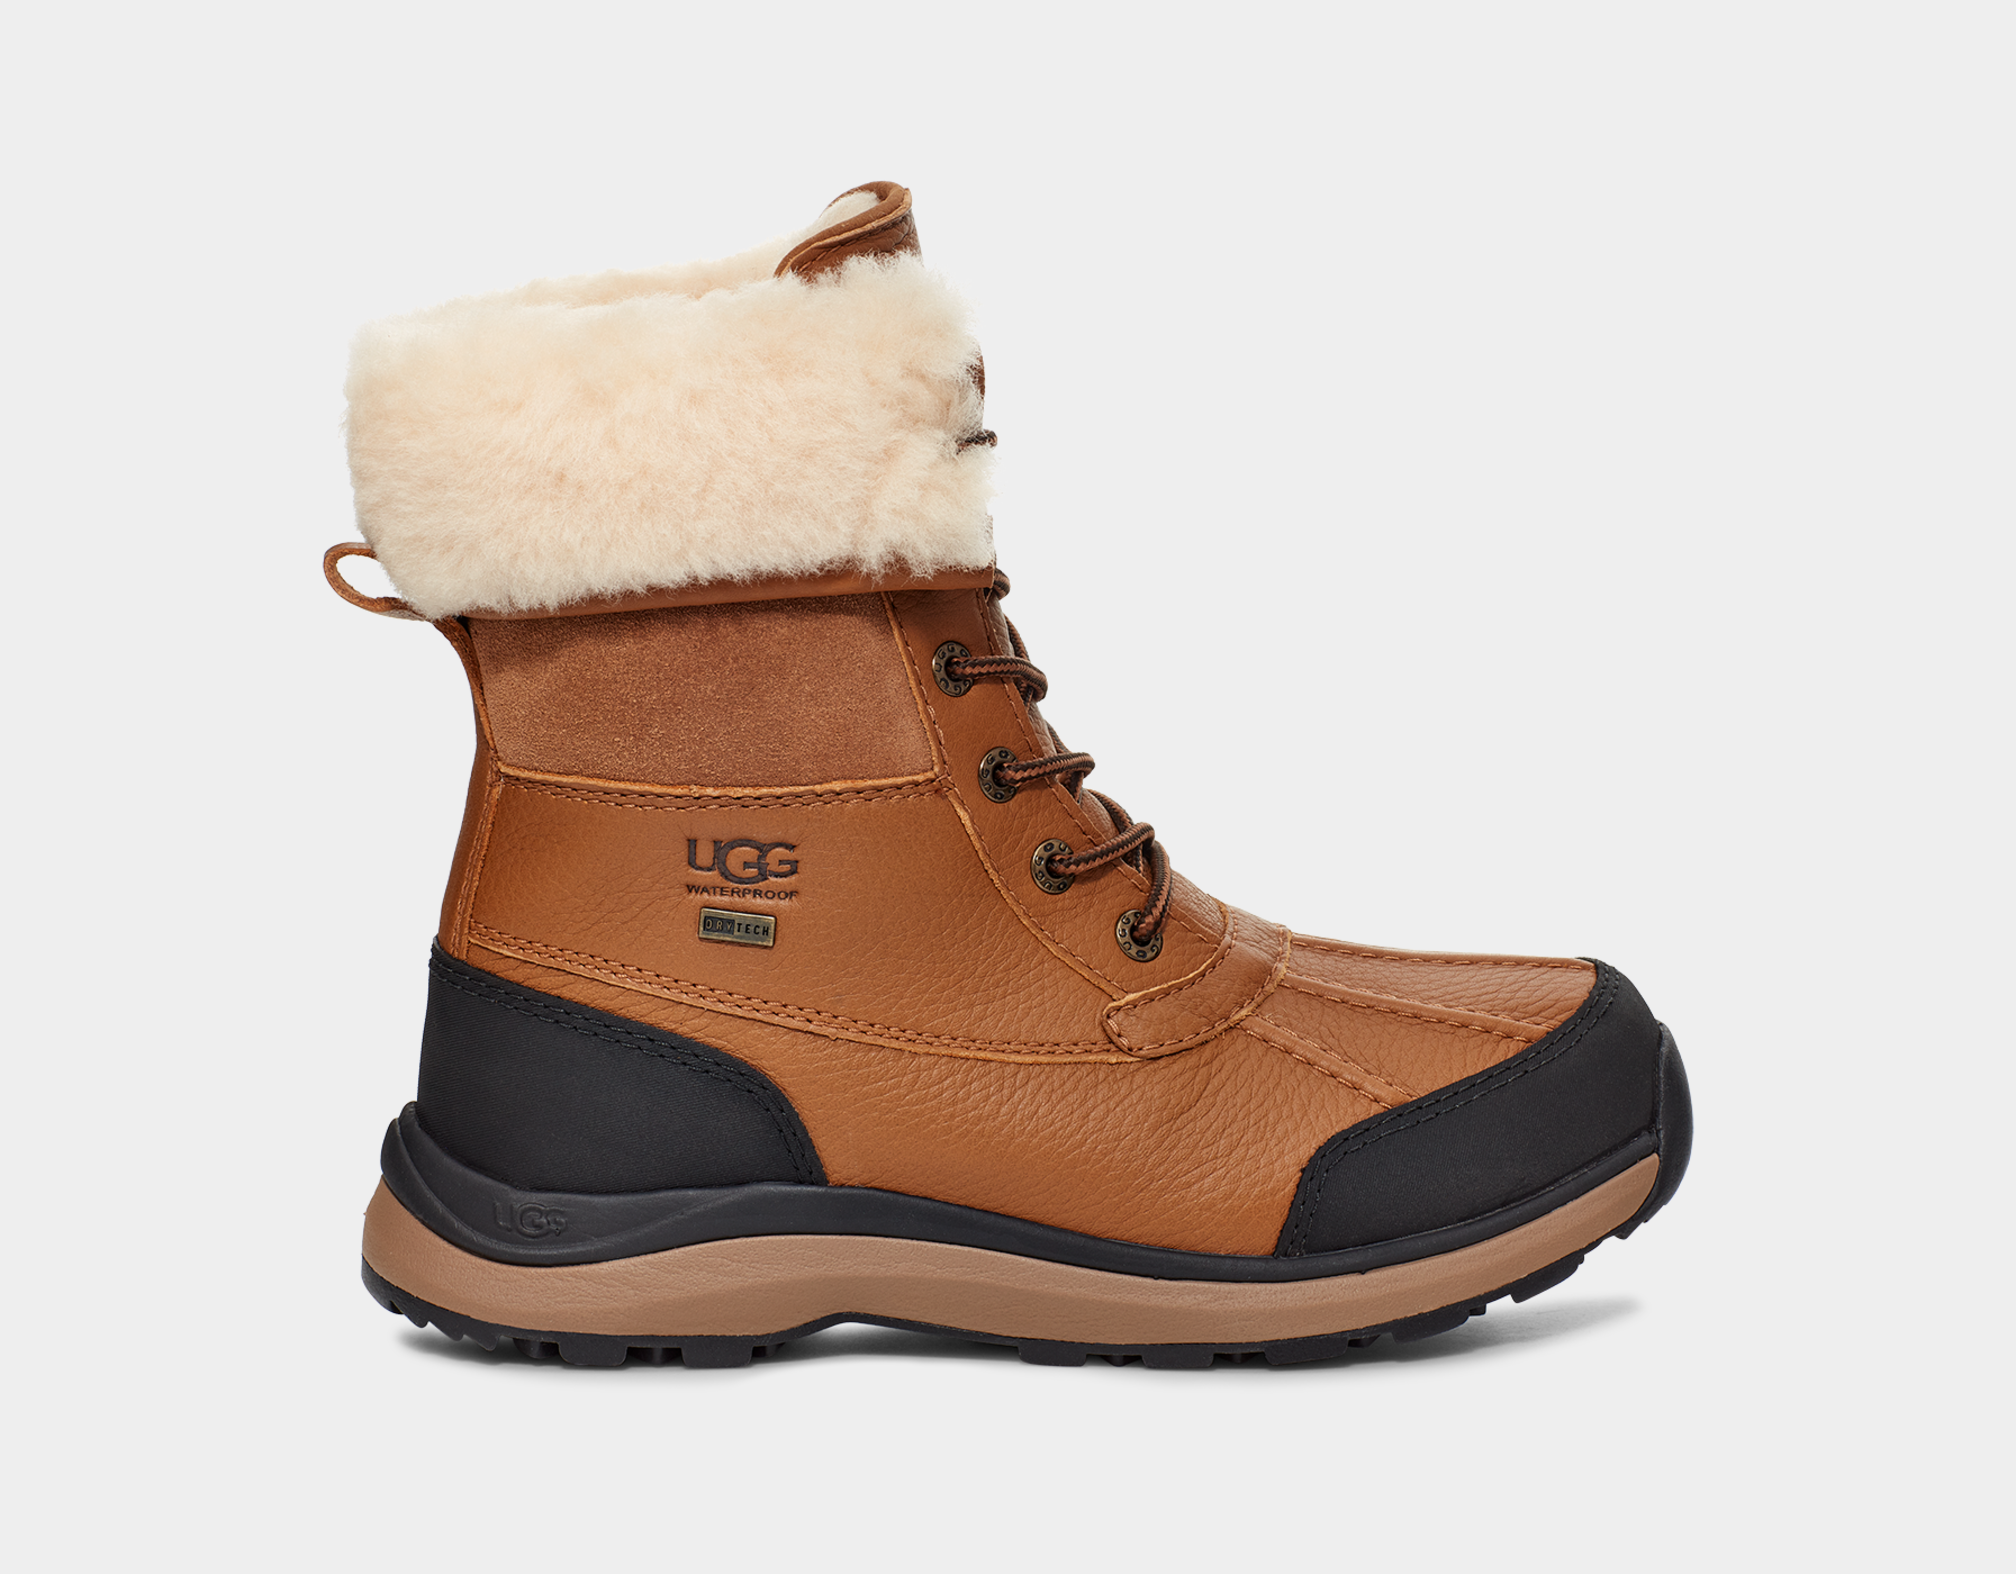 Women's winter boots, Up to 60%